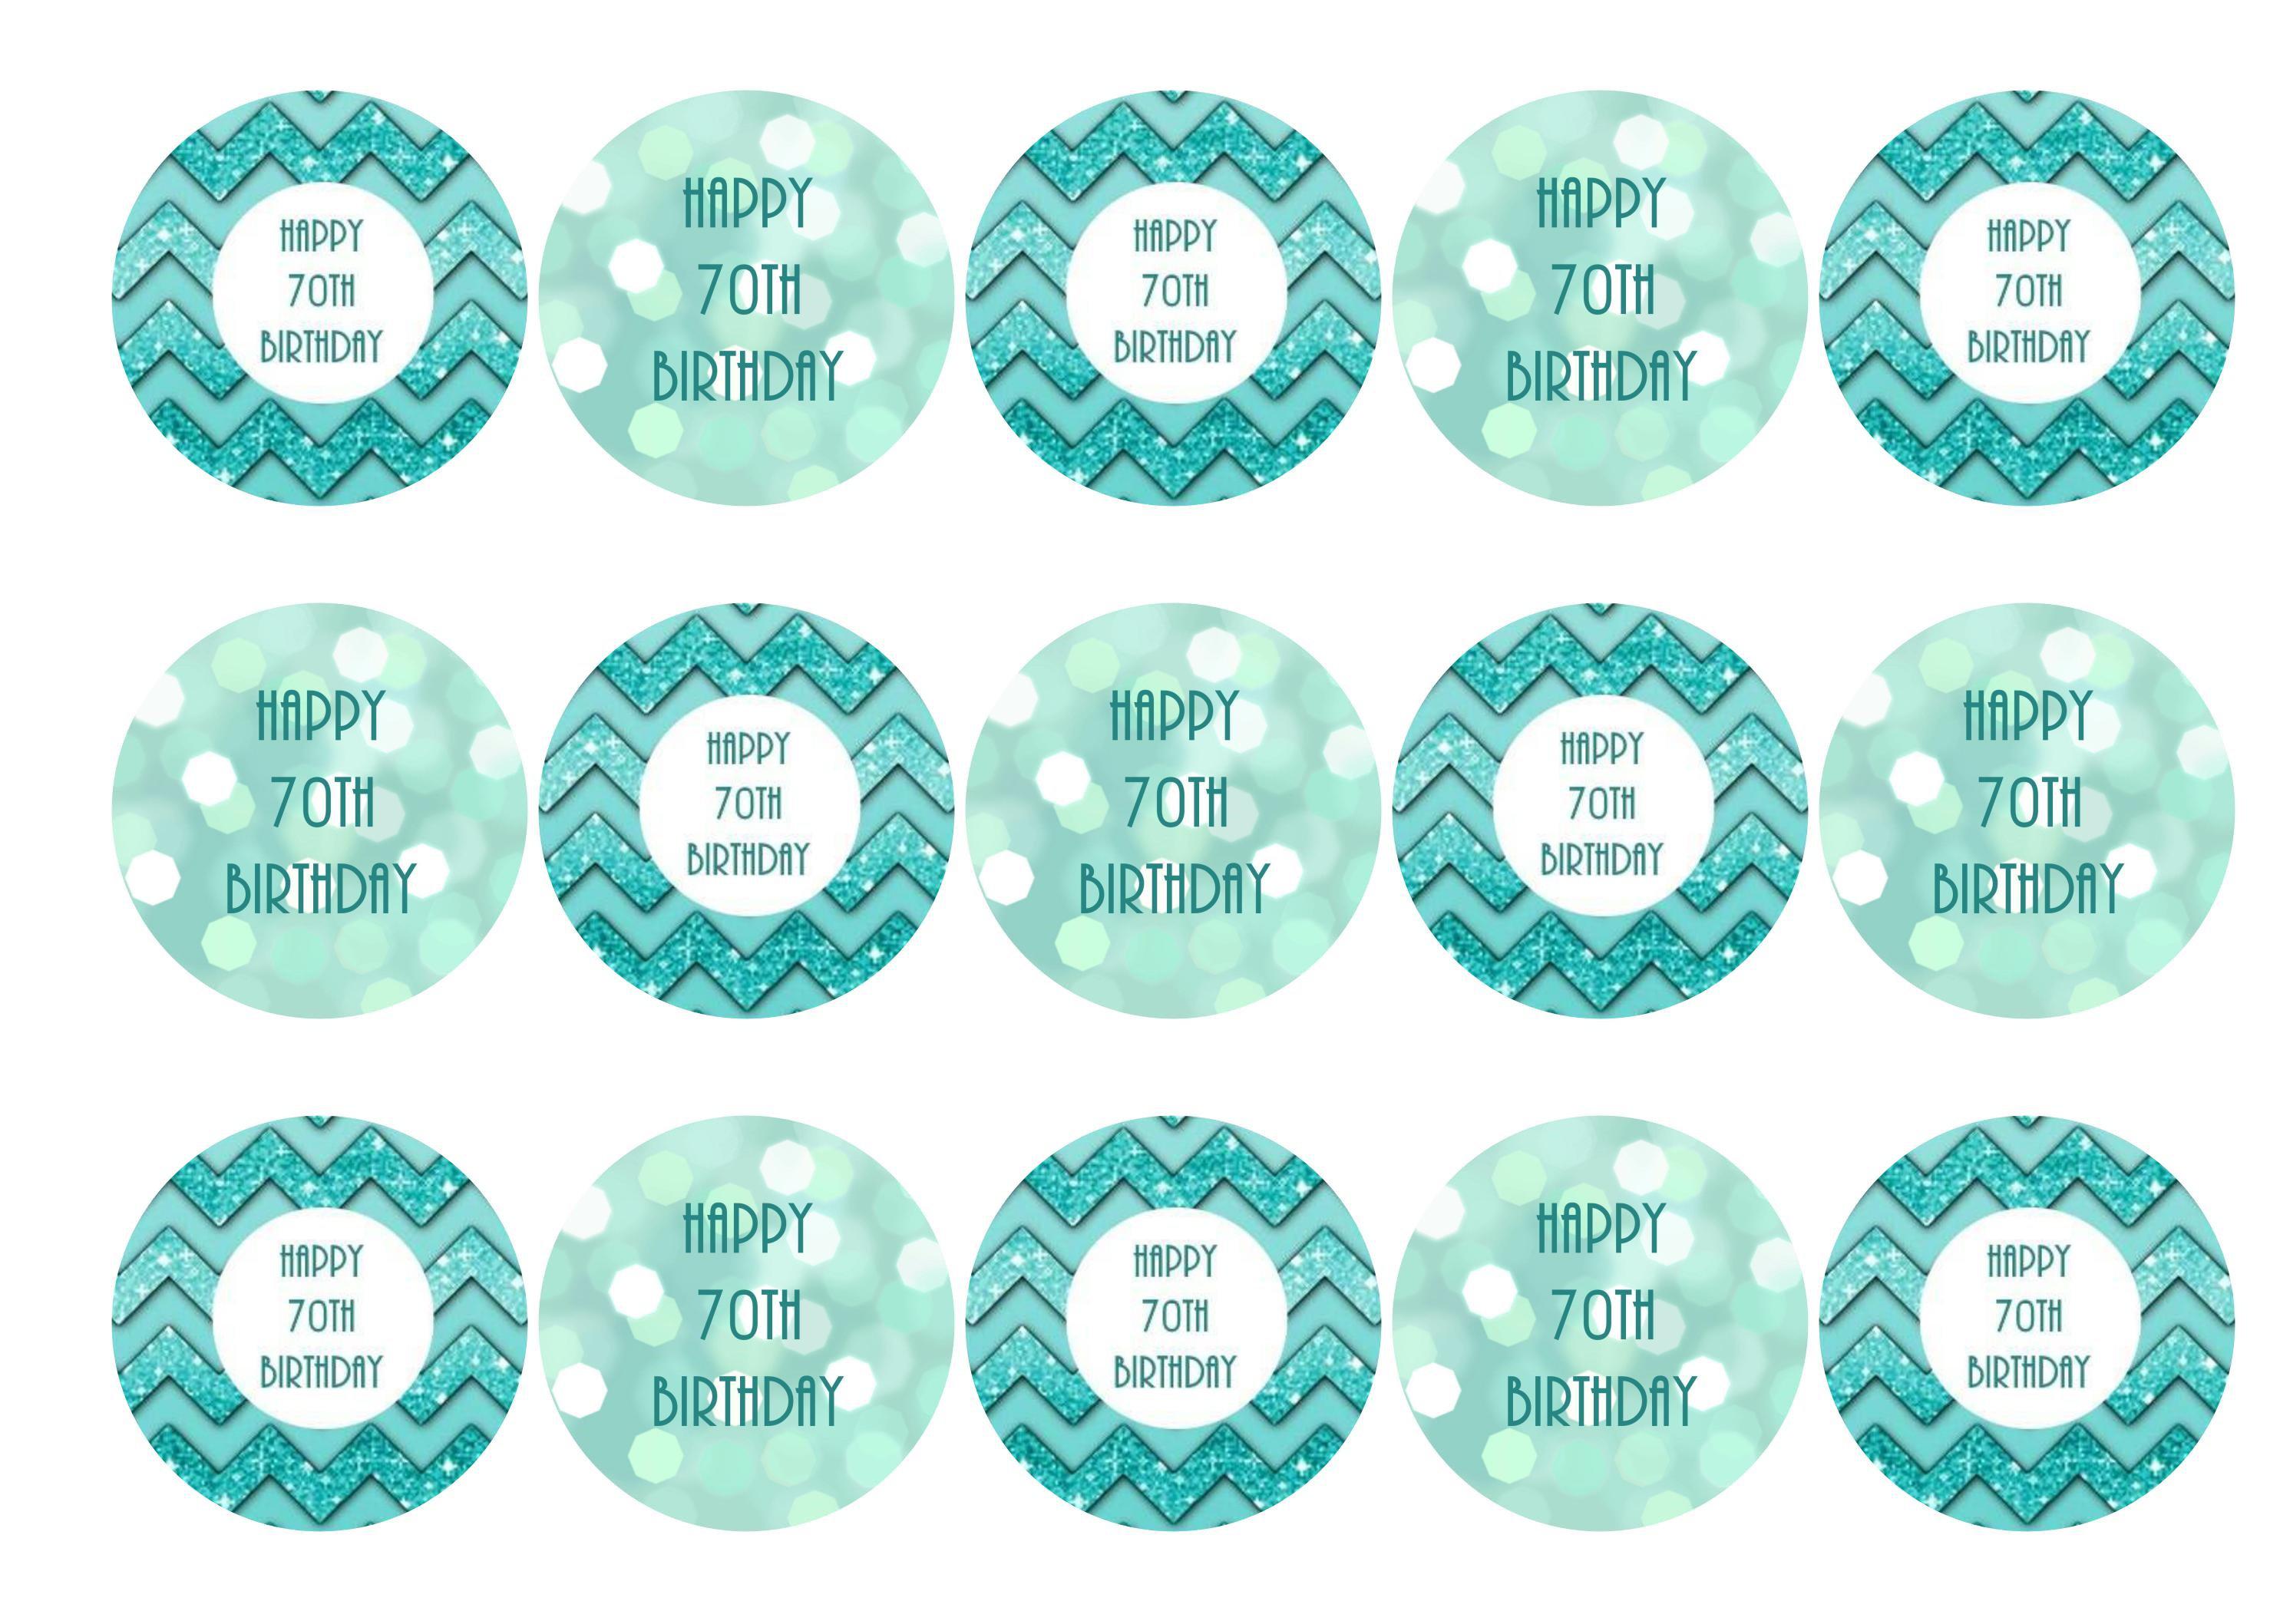 Edible cupcake toppers with a Tiffany Blue Happy 70th Birthday message